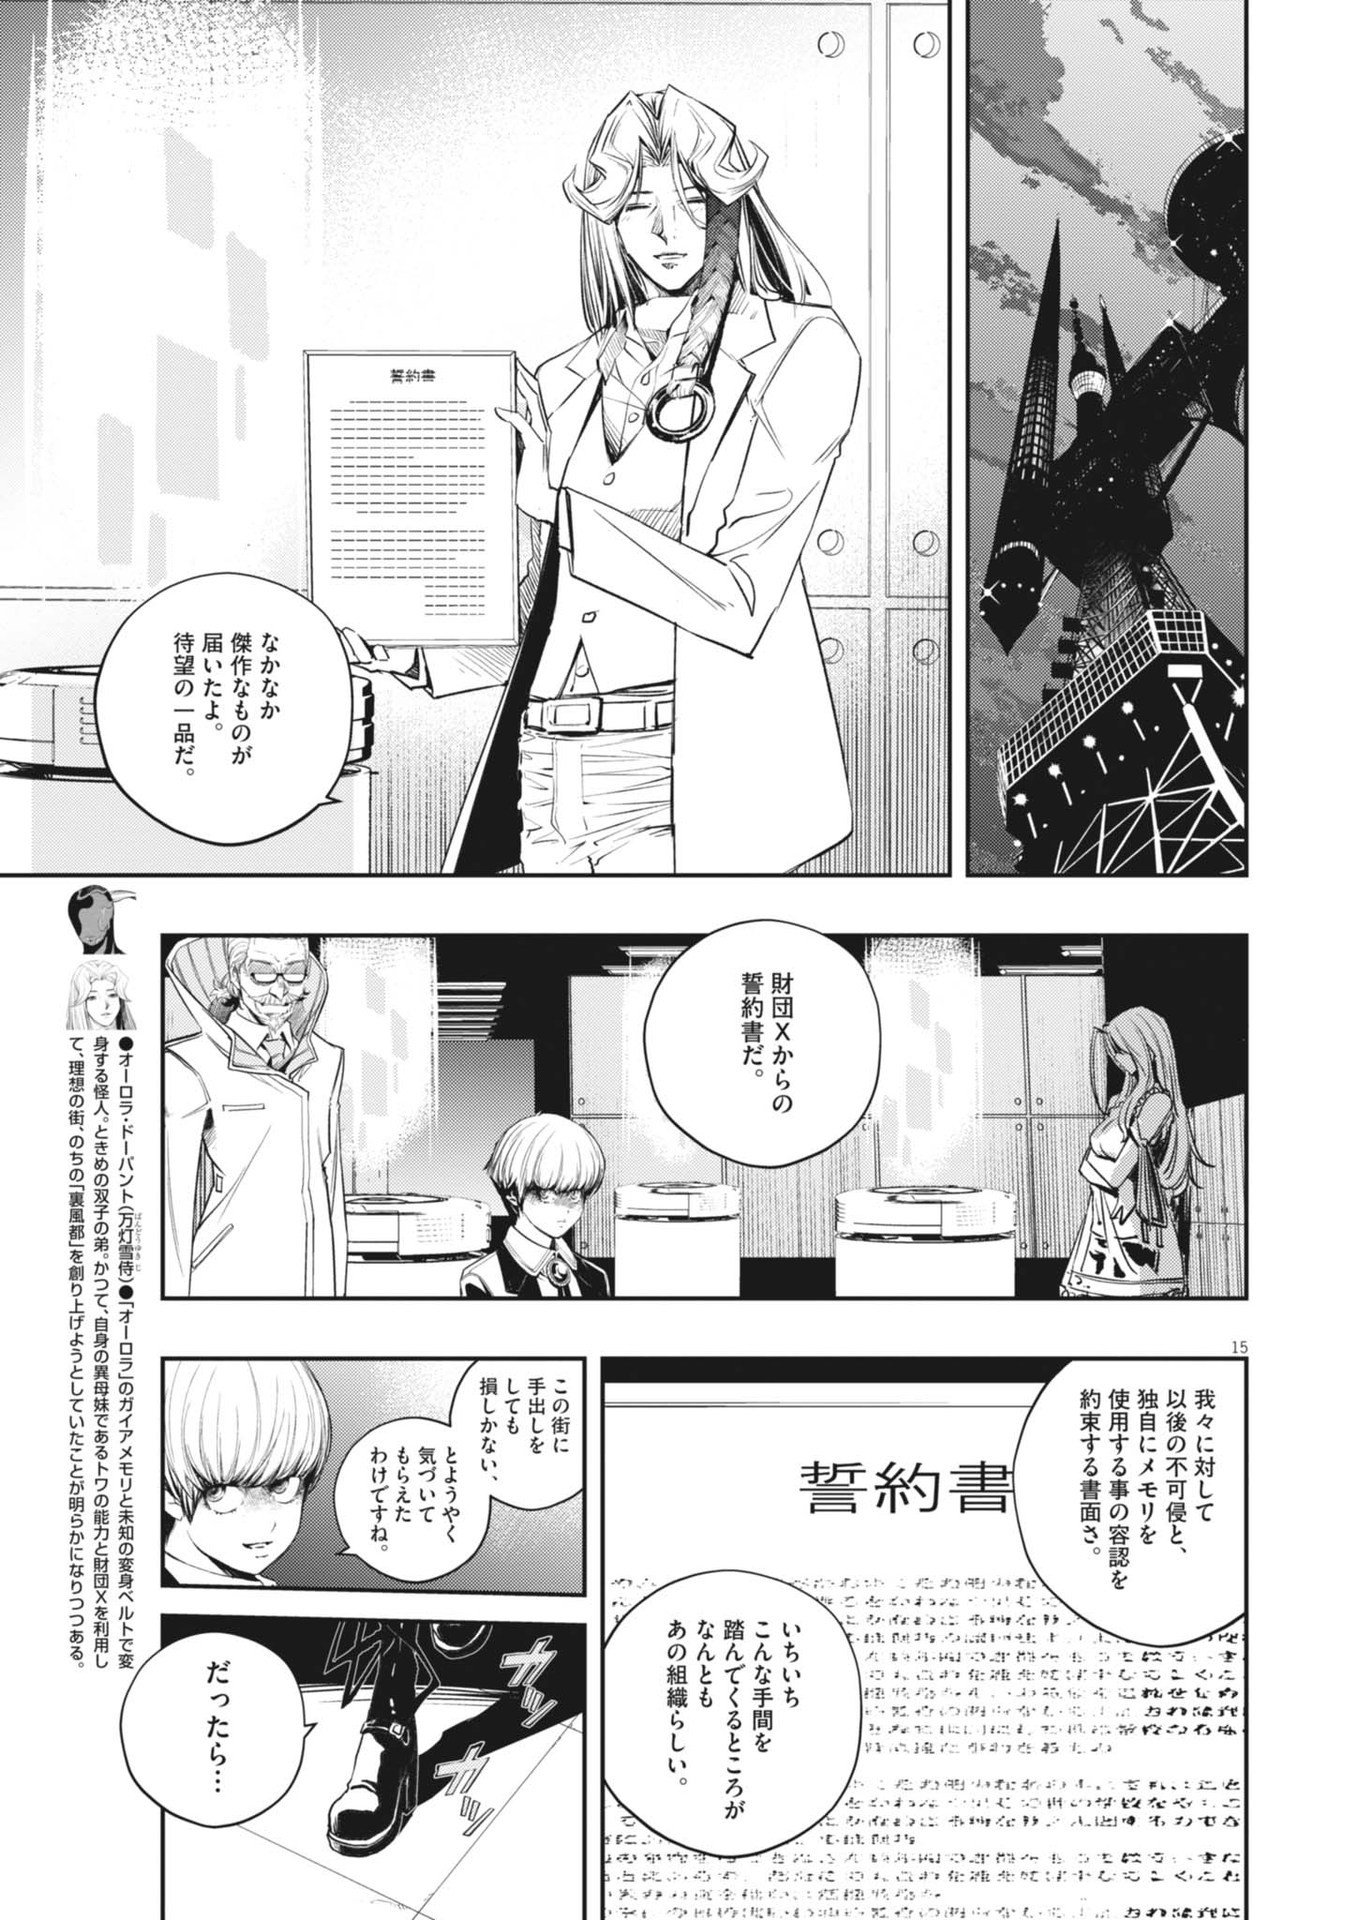 Kamen Rider W: Fuuto Tantei - Chapter 149 - Page 15